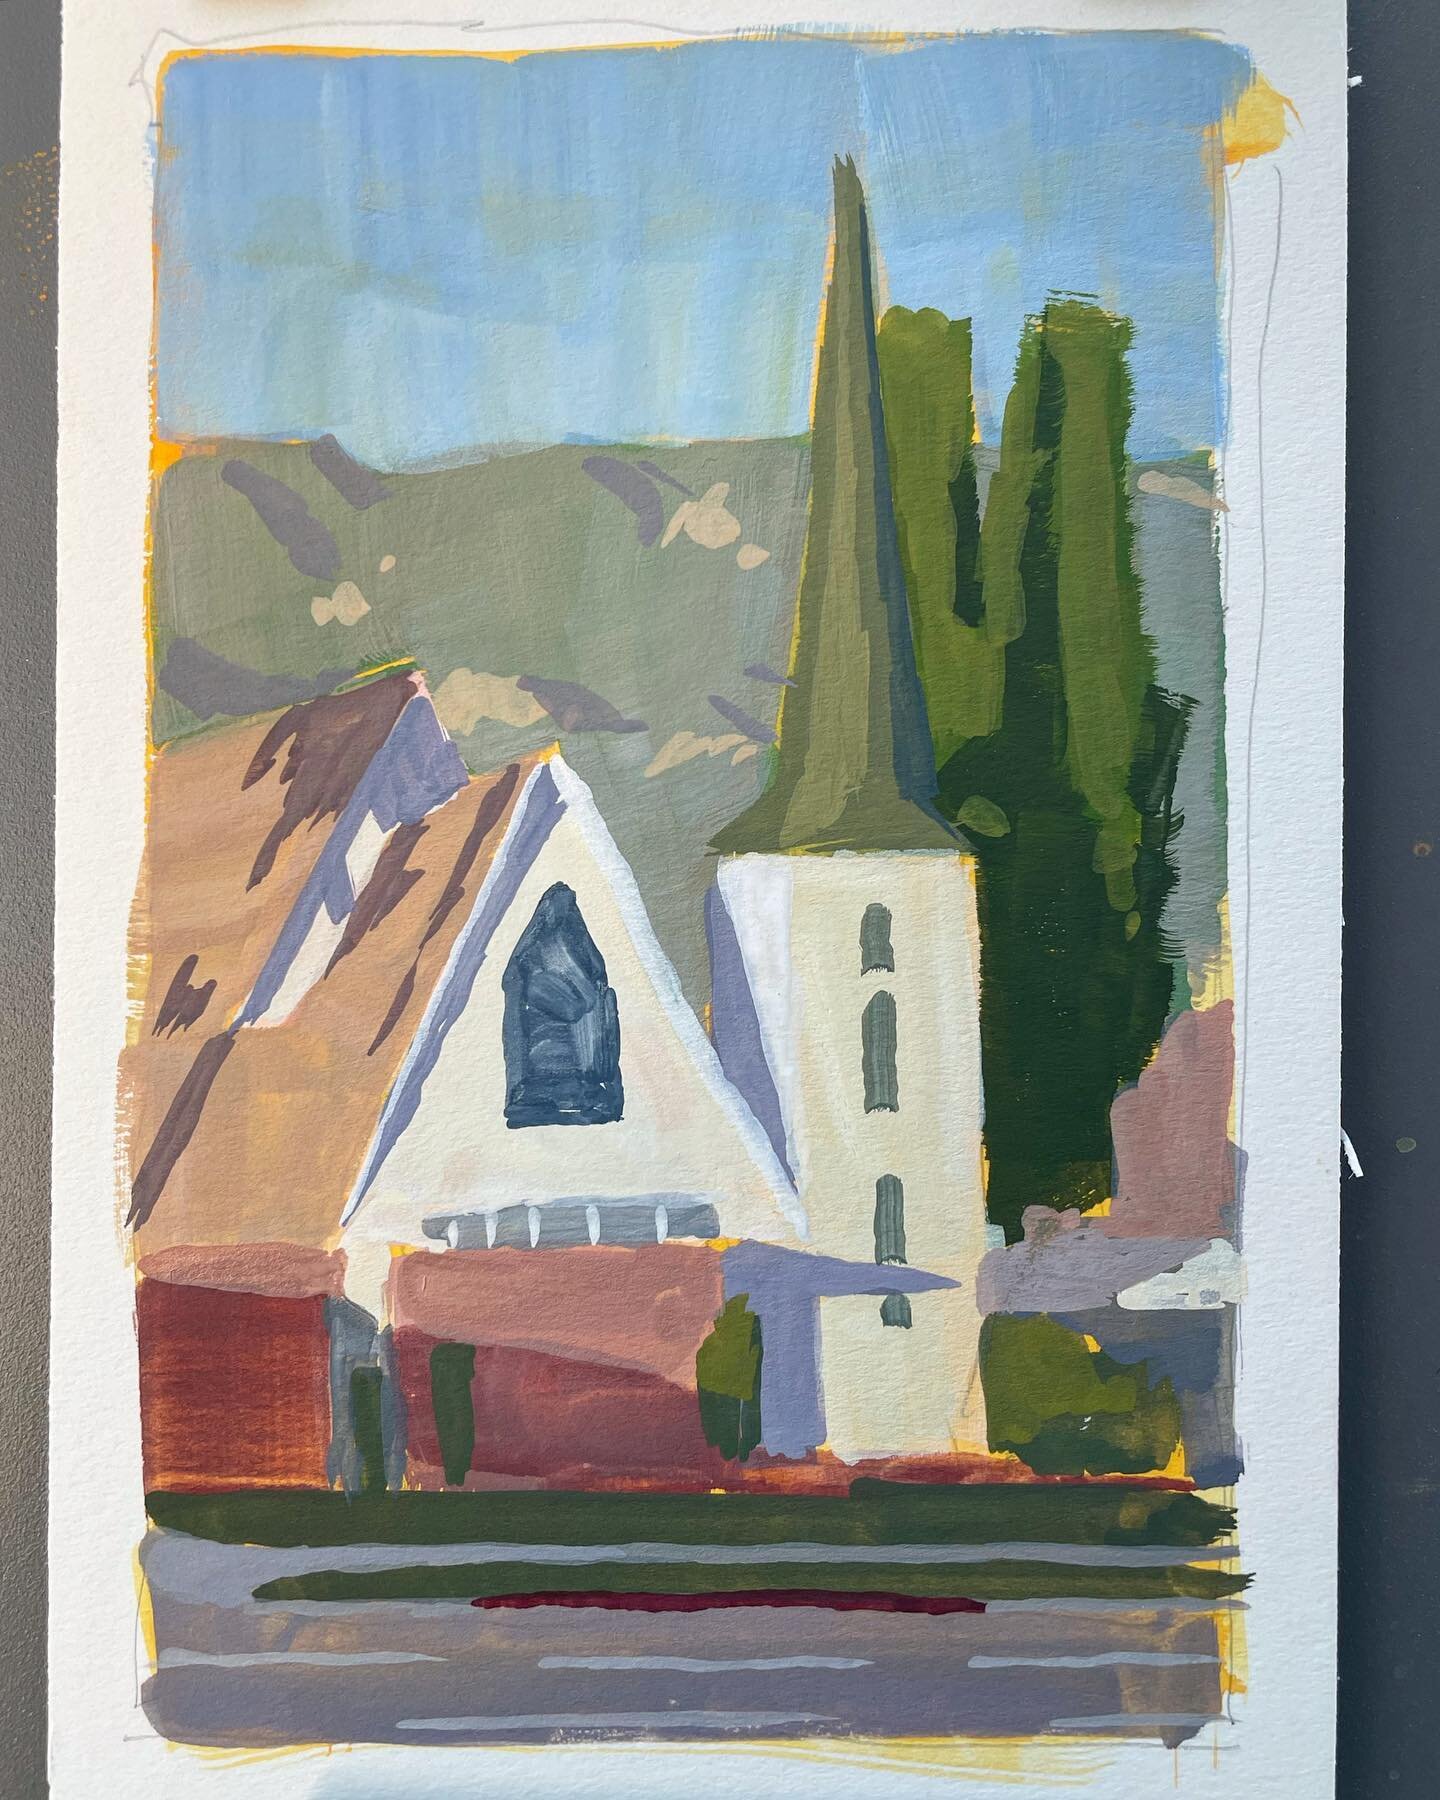 #pleinairpril Day 10. 1/3 of the way there! Nice view of the Verdugo Mts and a church at sunset. #pleinairpainting #pleinair #painting #burbank #gouache #painterofaight